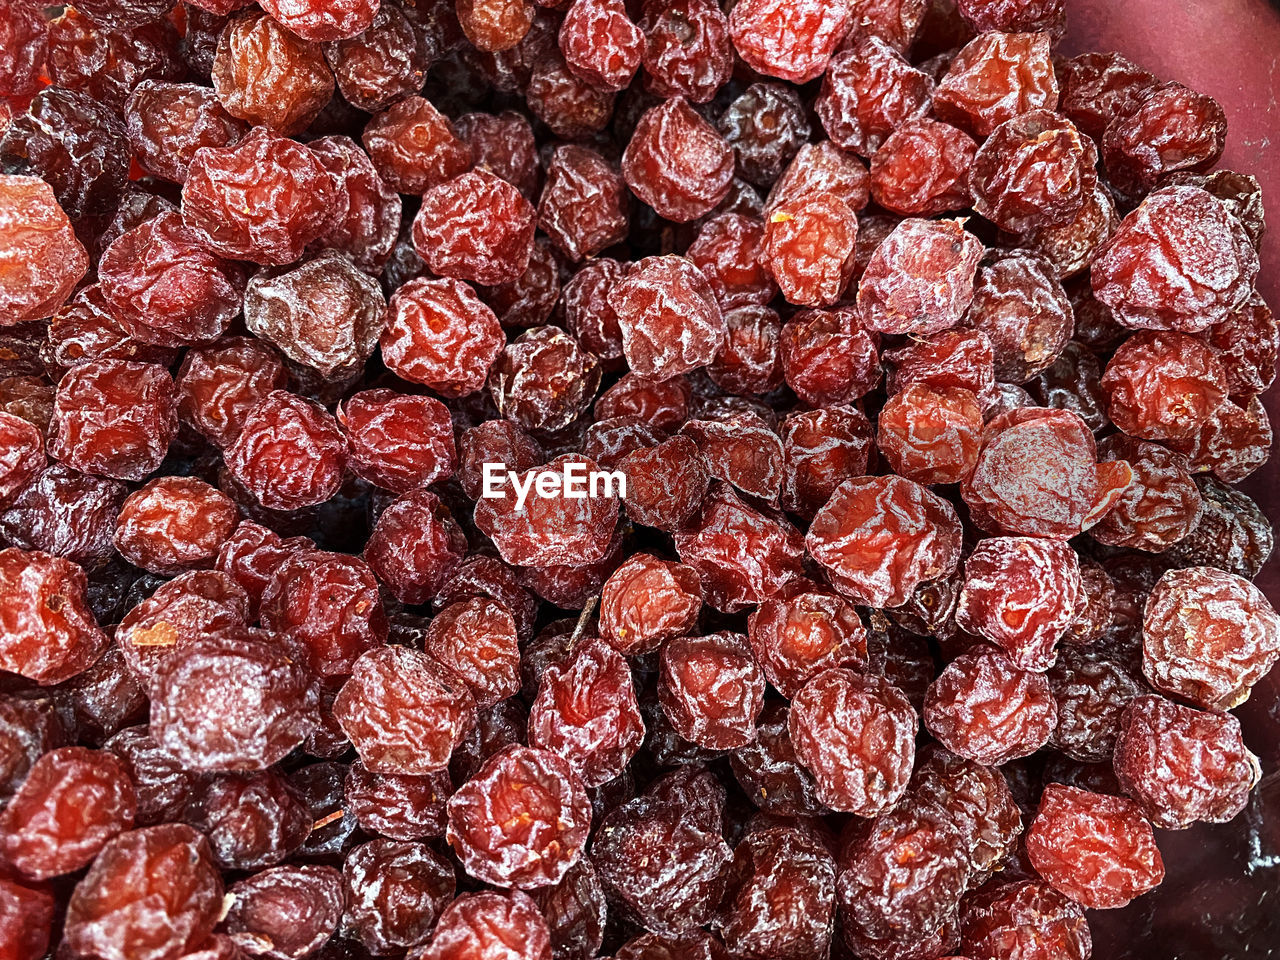 fruit, food, food and drink, plant, freshness, healthy eating, berry, wellbeing, produce, red, large group of objects, abundance, no people, berries, still life, close-up, raspberry, dried food, sultana, indoors, backgrounds, dried fruit, high angle view, sweet food, full frame, directly above